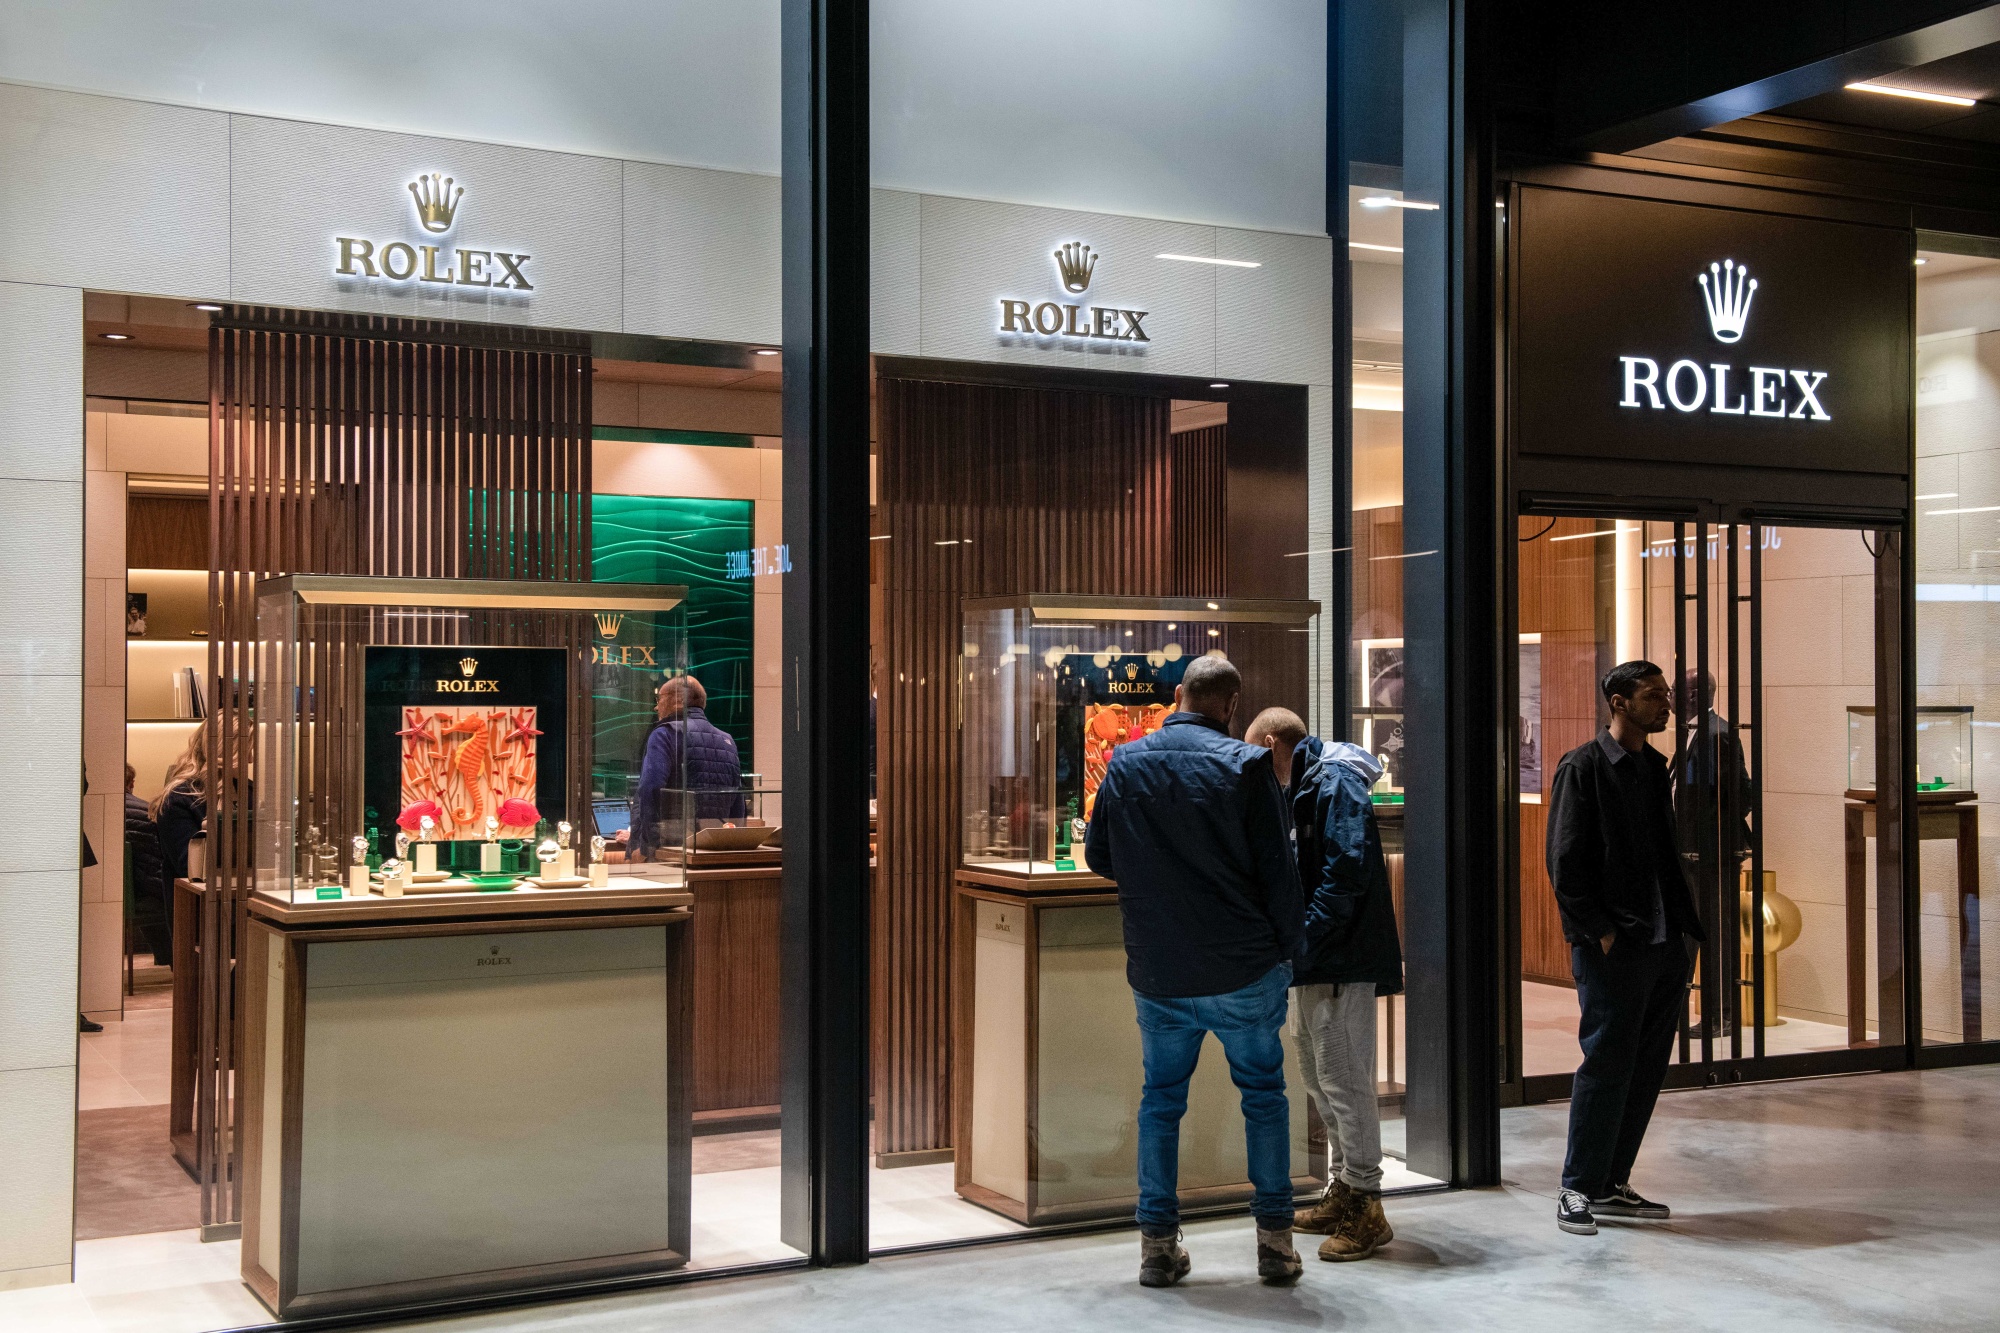 nær ved Ideel Zoologisk have Rolex Gets More Expensive in UK and US With Latest Price Hikes - Bloomberg